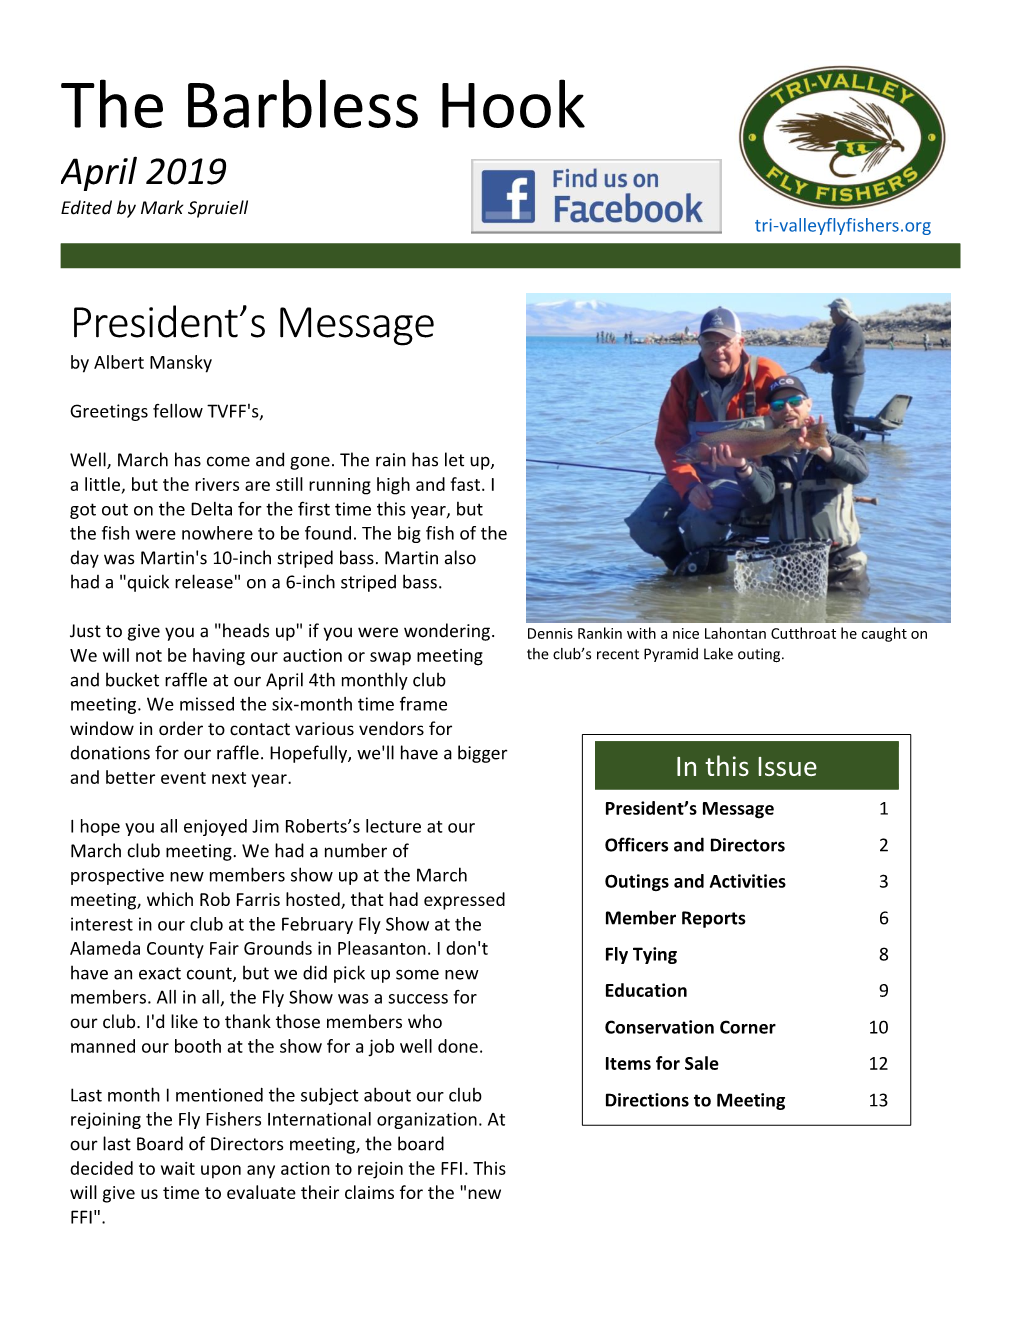 The Barbless Hook April 2019 Edited by Mark Spruiell Tri-Valleyflyfishers.Org